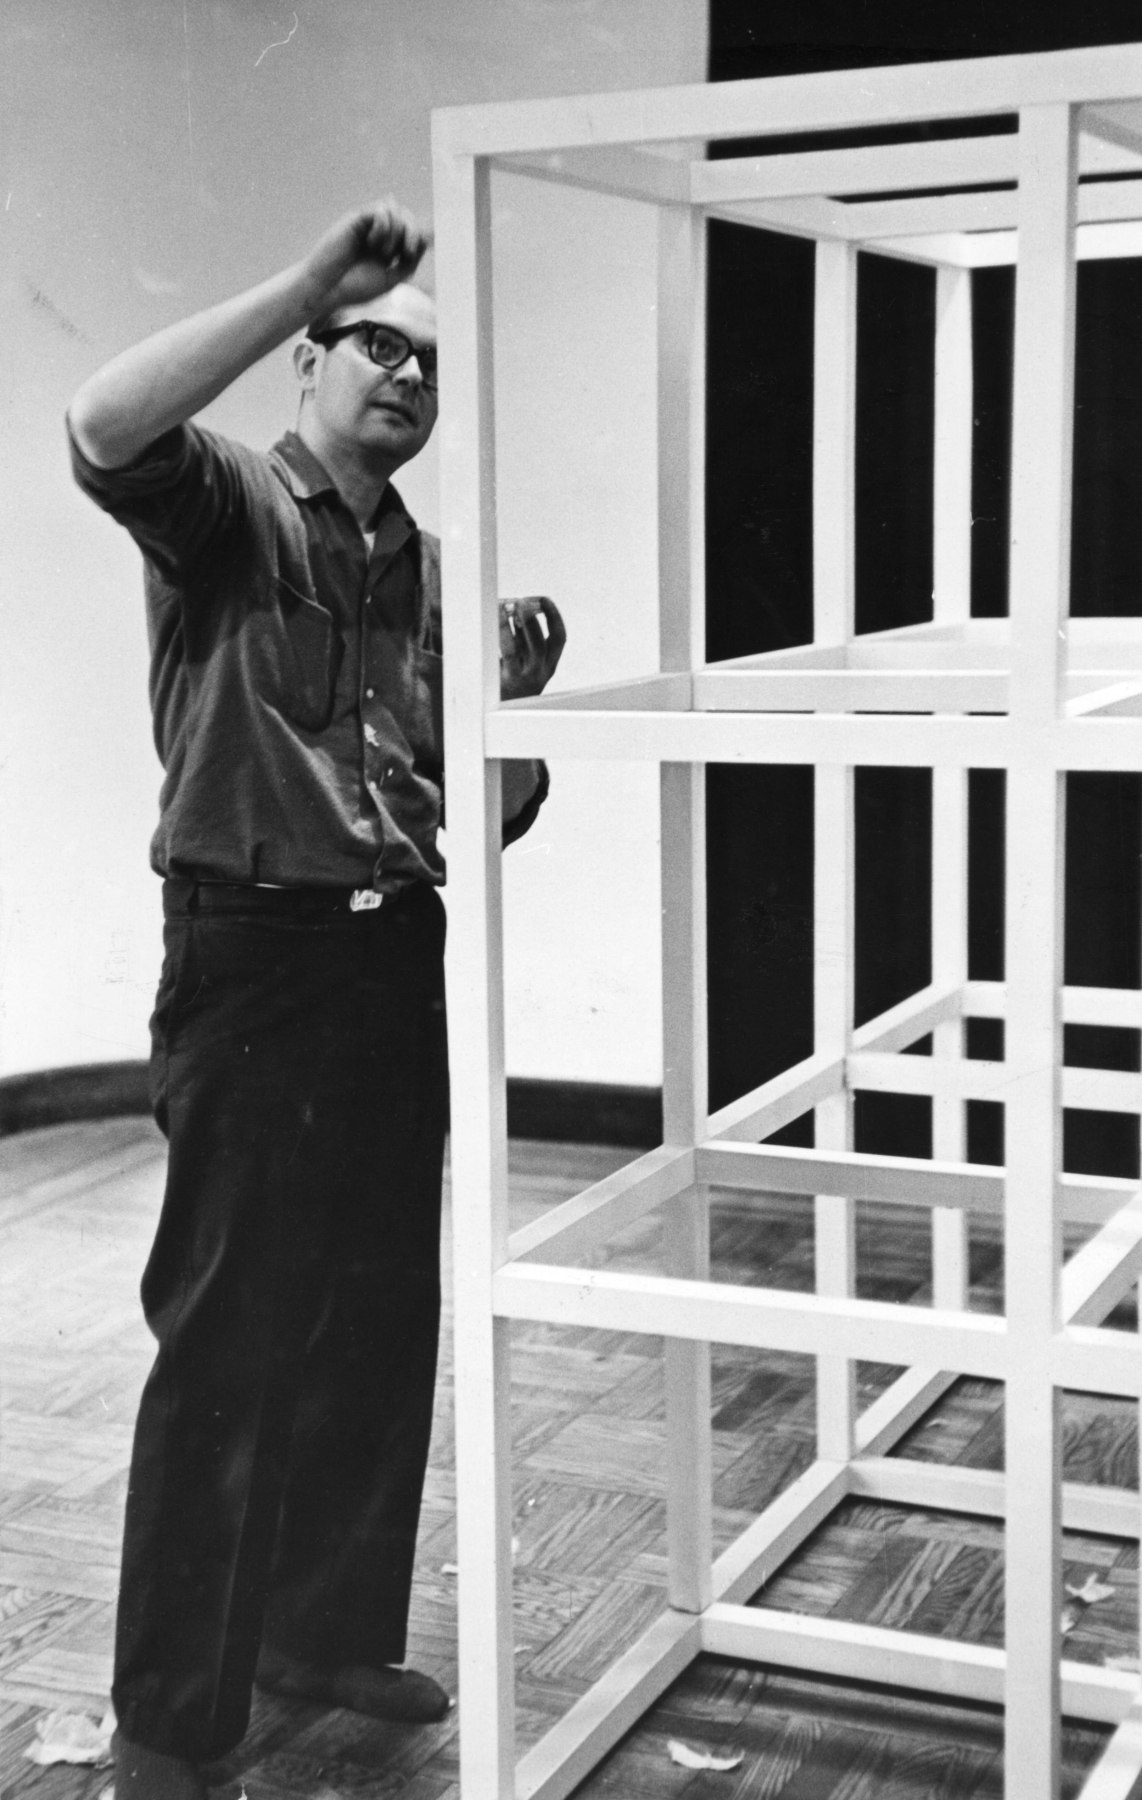 Sol LeWitt painting one his sculptures as he installs his work at the Primary Structures exhibition at the Jewish Museum, New York, 1966. Photo by Fred W. McDarrah / MUUS Collection via Getty Images.